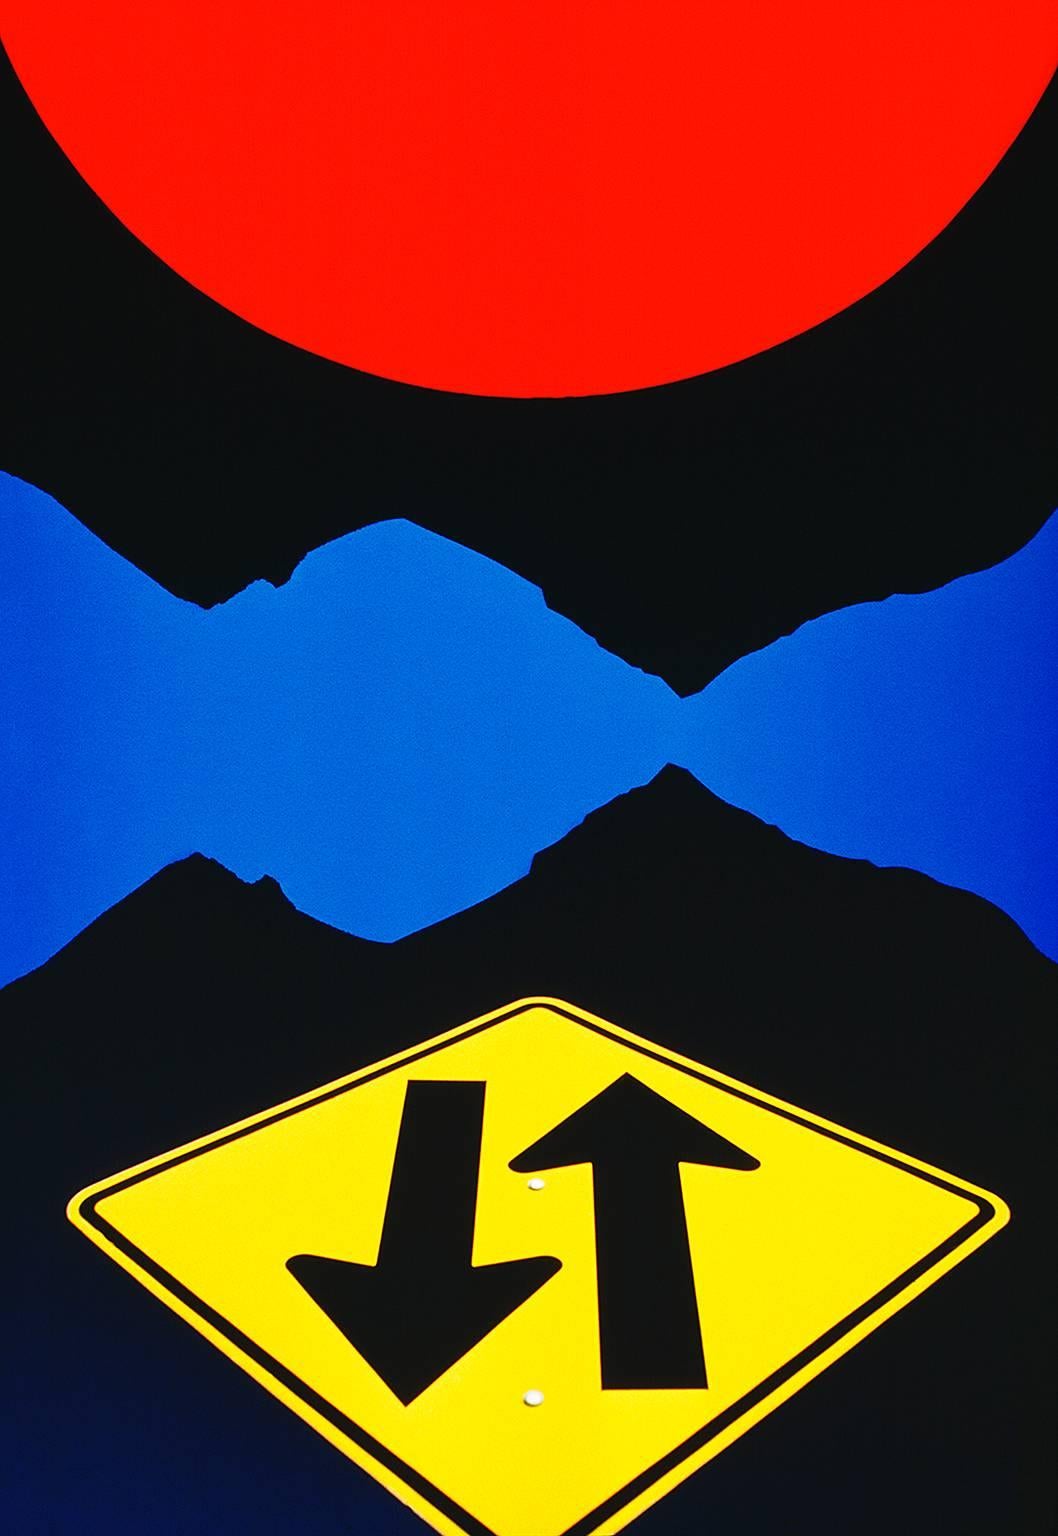 Hard Edge Abstraction - Signs and Shapes,  Modern Photography Cover 